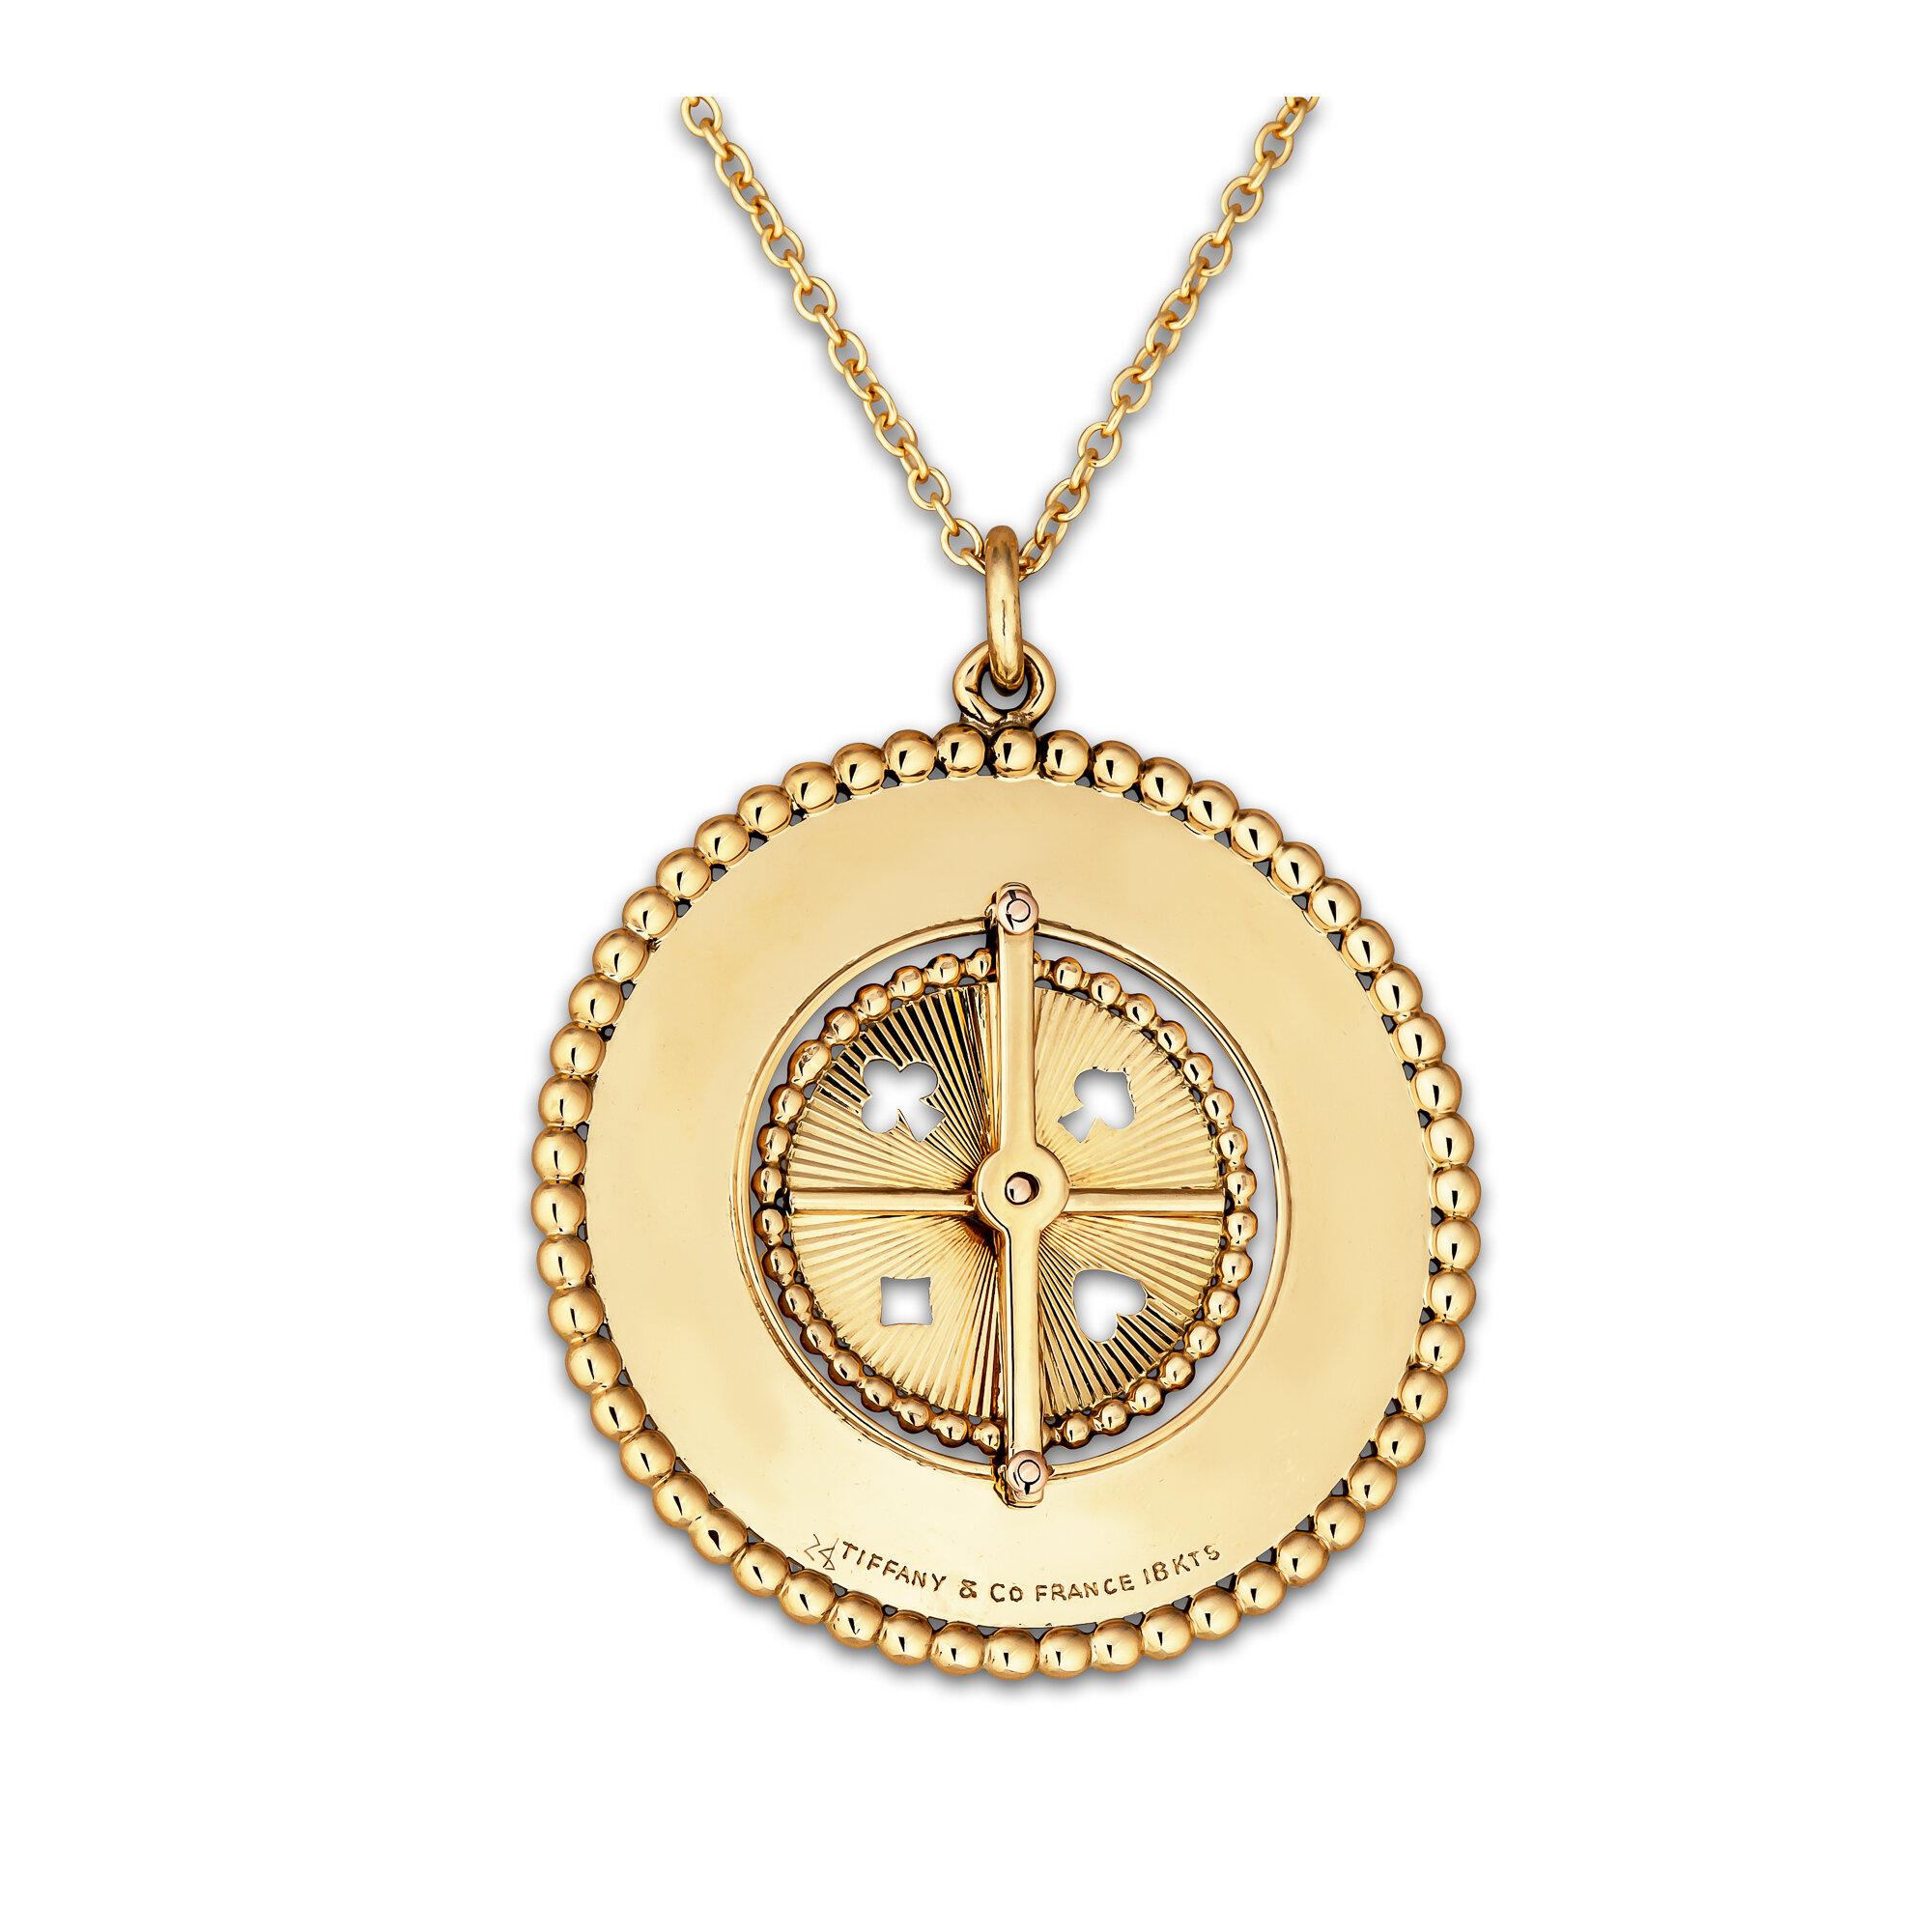 Spin the inner roulette wheel of this vintage Tiffany & Co. France 18 karat gold charm and you will always be a winner.  With the four suits of hearts, spades, diamonds, and clubs represented on the cabochon ruby topped wheel, this lucky pendant